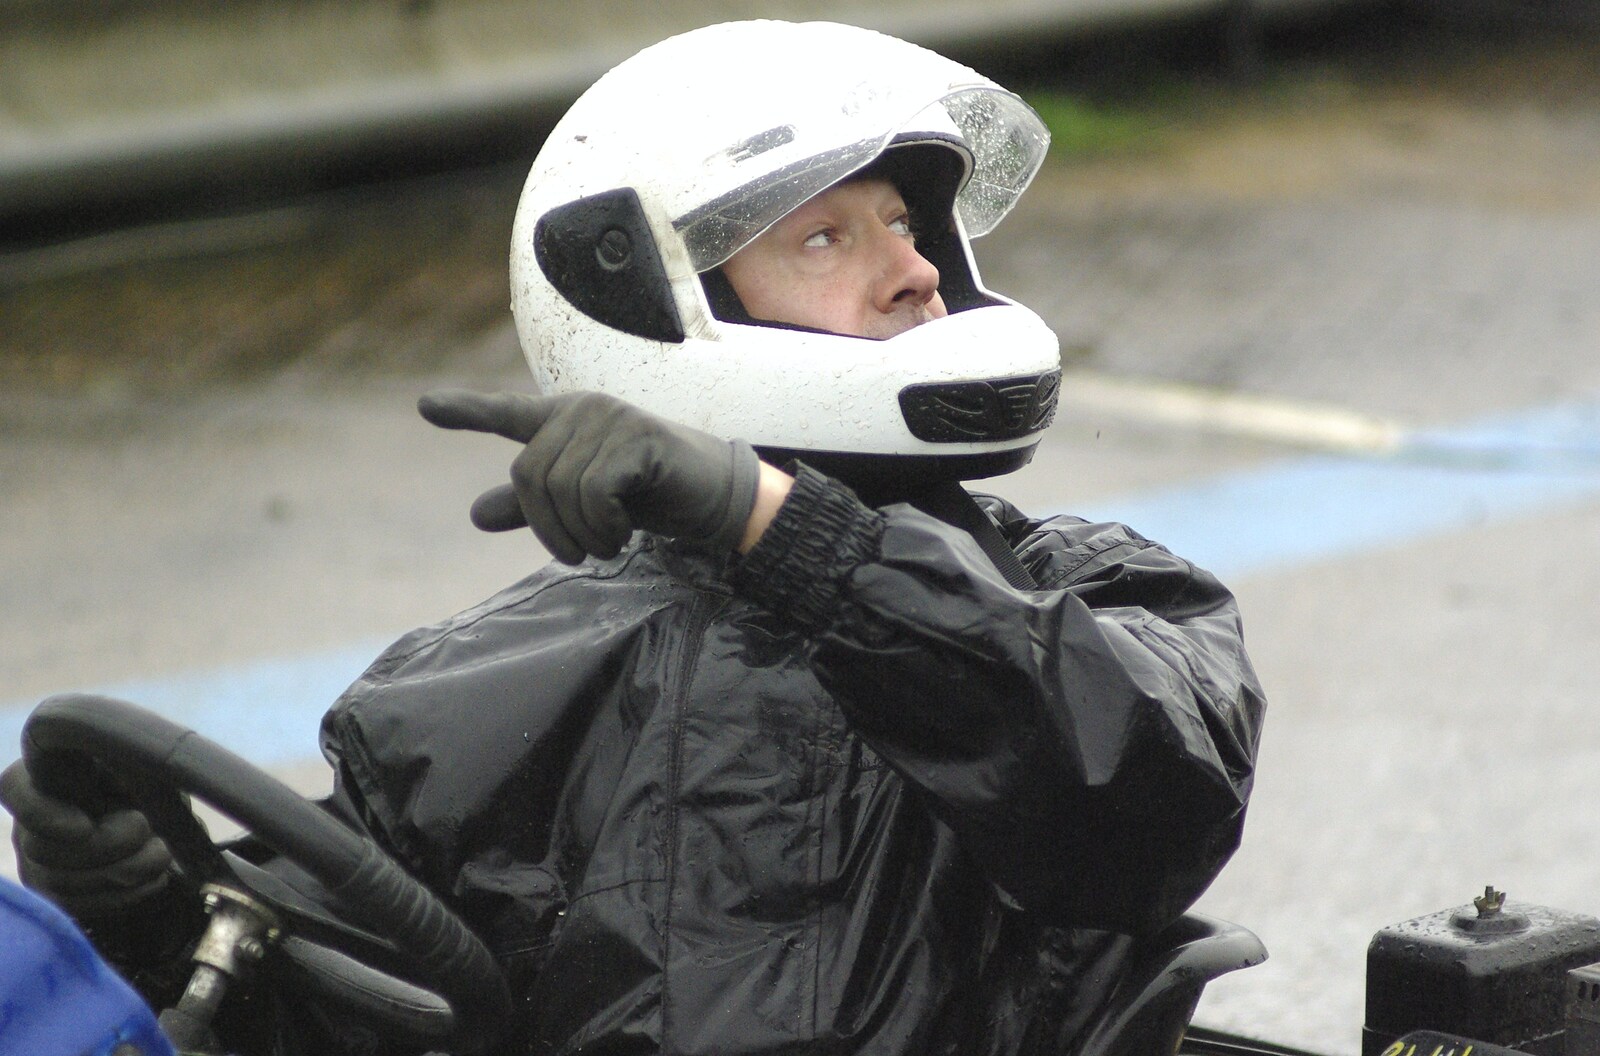 Gov's Stag-Day Karting, Ellough Airfield, Beccles, Suffolk - 19th January 2008: DH checks that he's pointing the right way